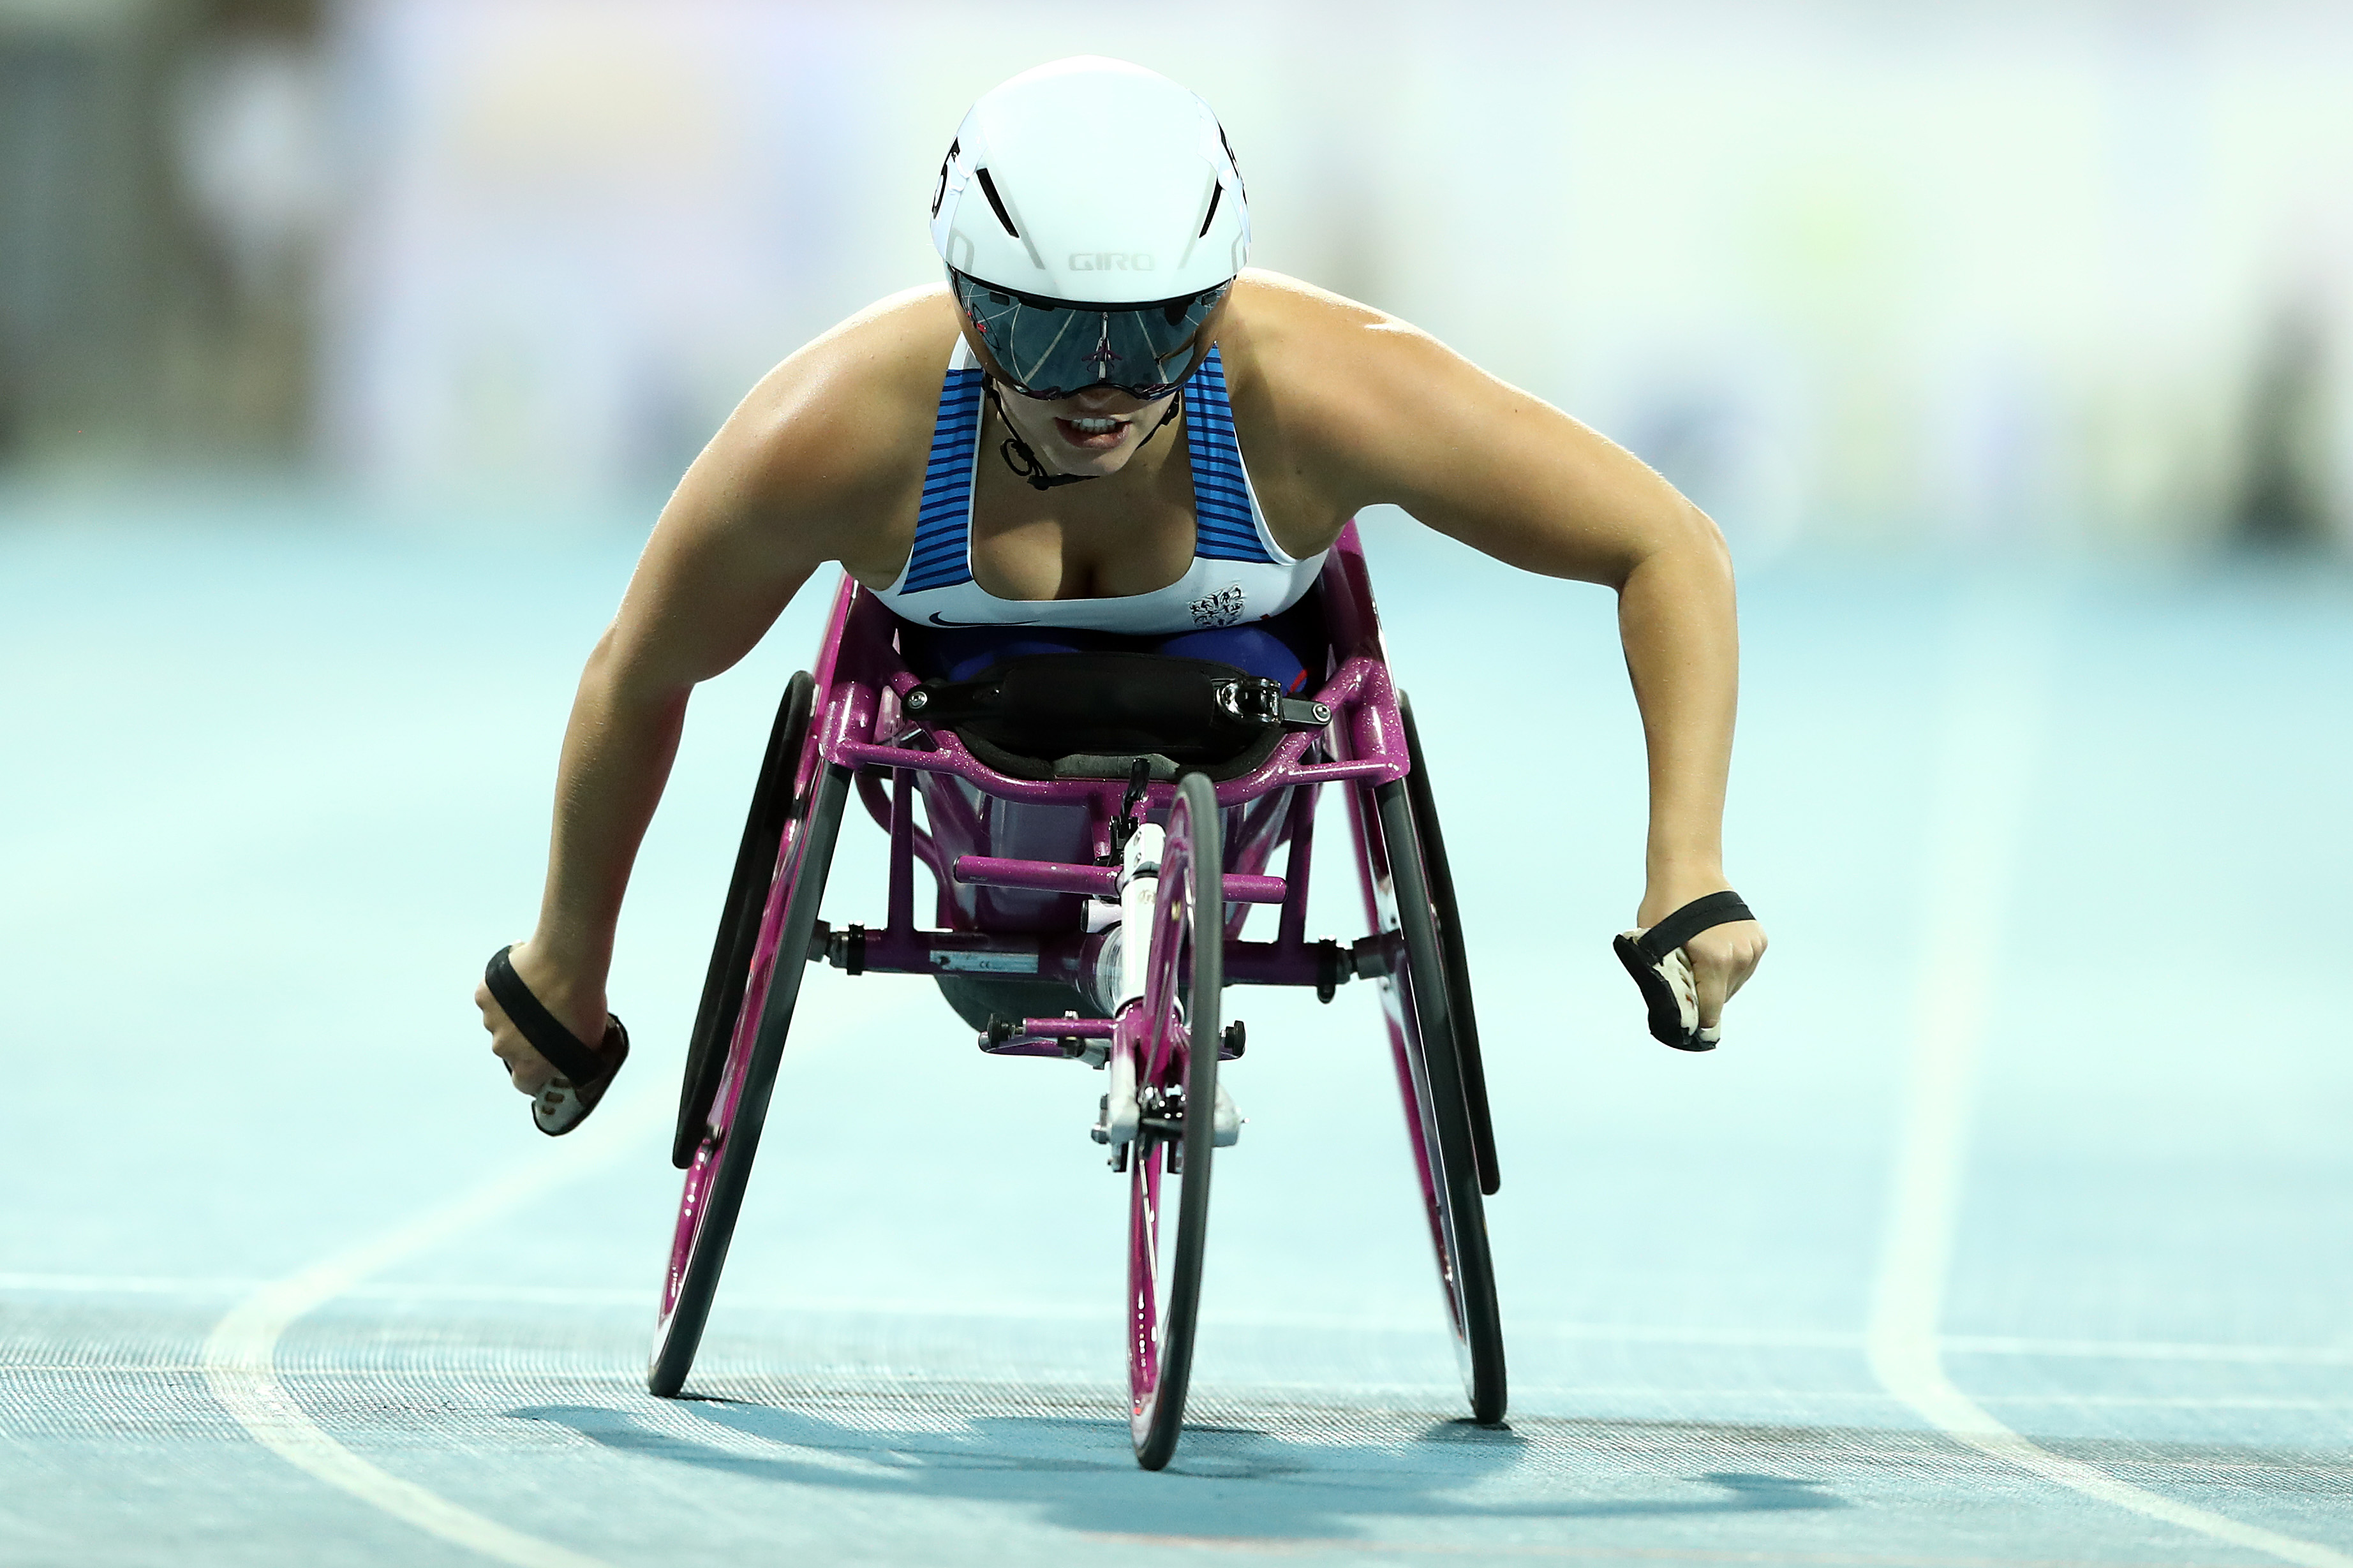 KINGHORN RETURNS WITH A BRONZE AT THE WORLD PARA ATHLETICS CHAMPIONSHIPS